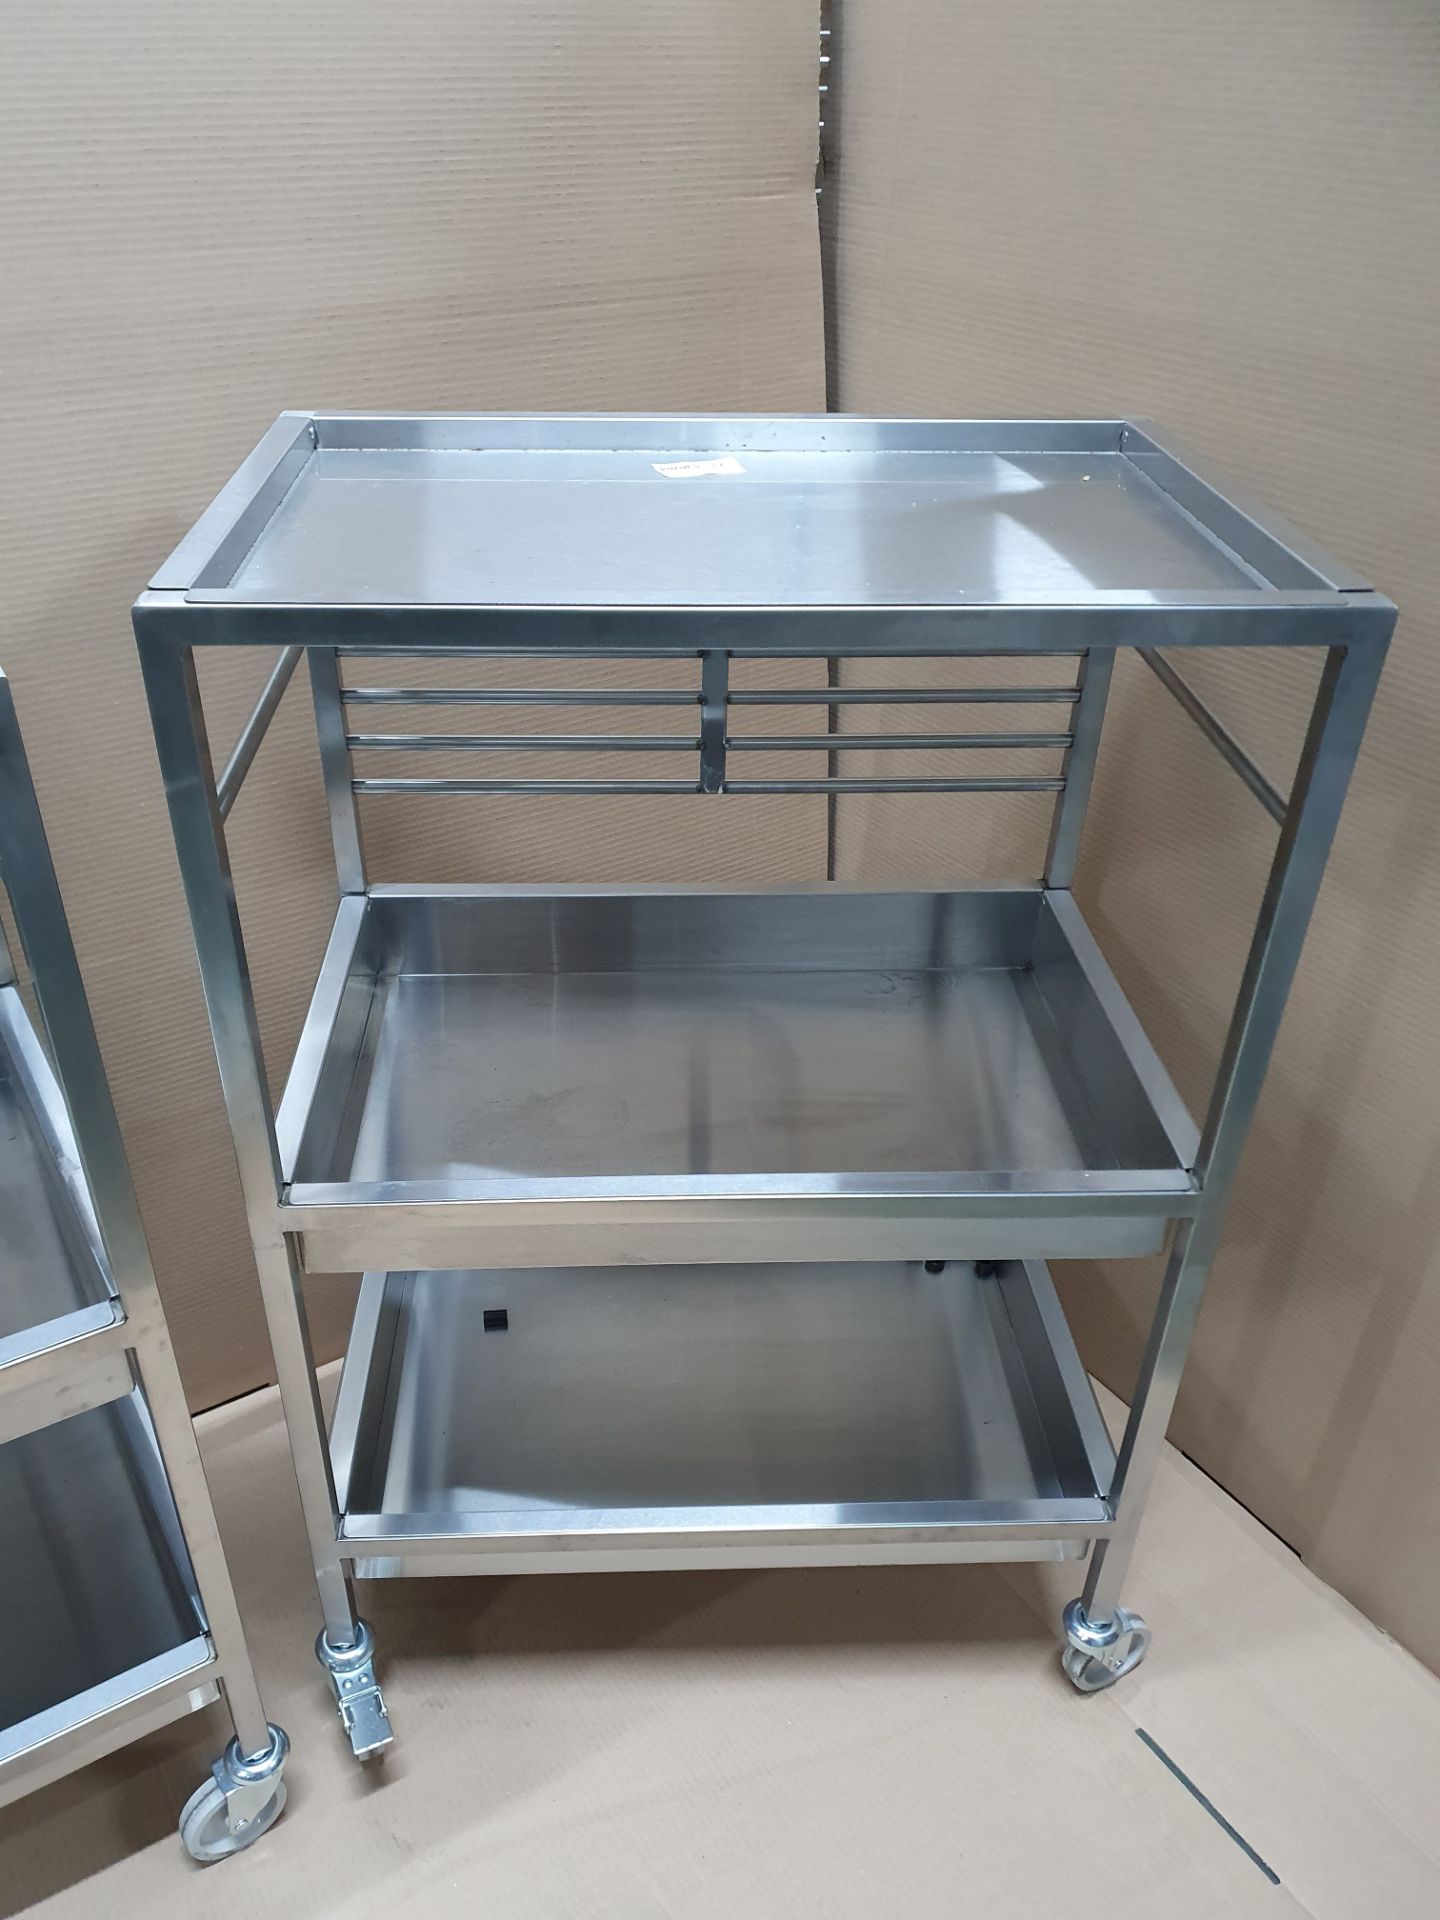 2 x 3 tier Metal trollies on Wheels with Removable Shelves - Image 3 of 7